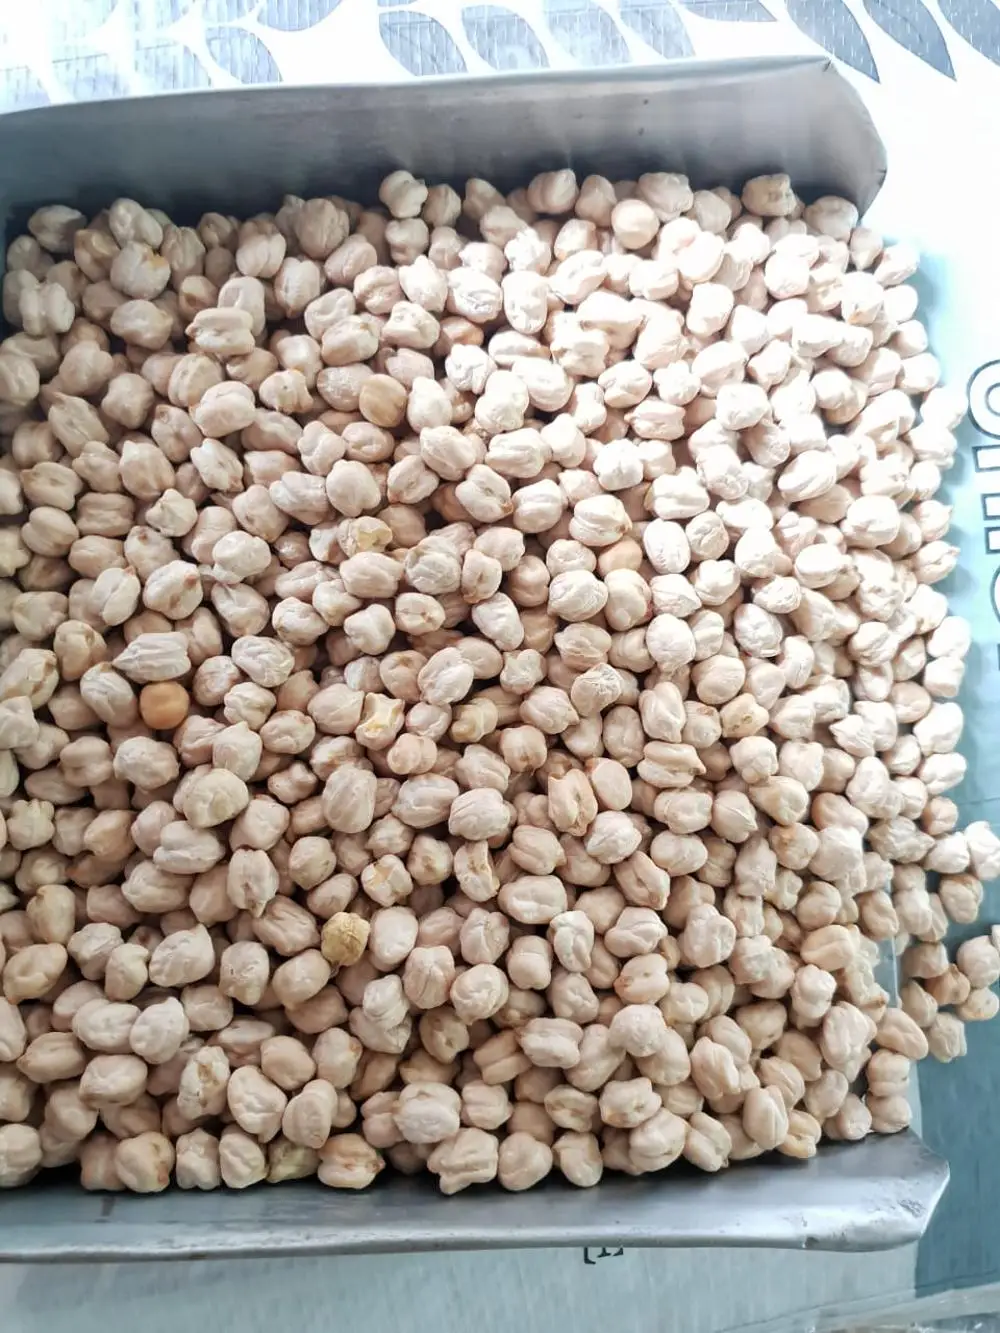 
Kabuli chick peas ( Size13 mm, Count - 40/42 ) 